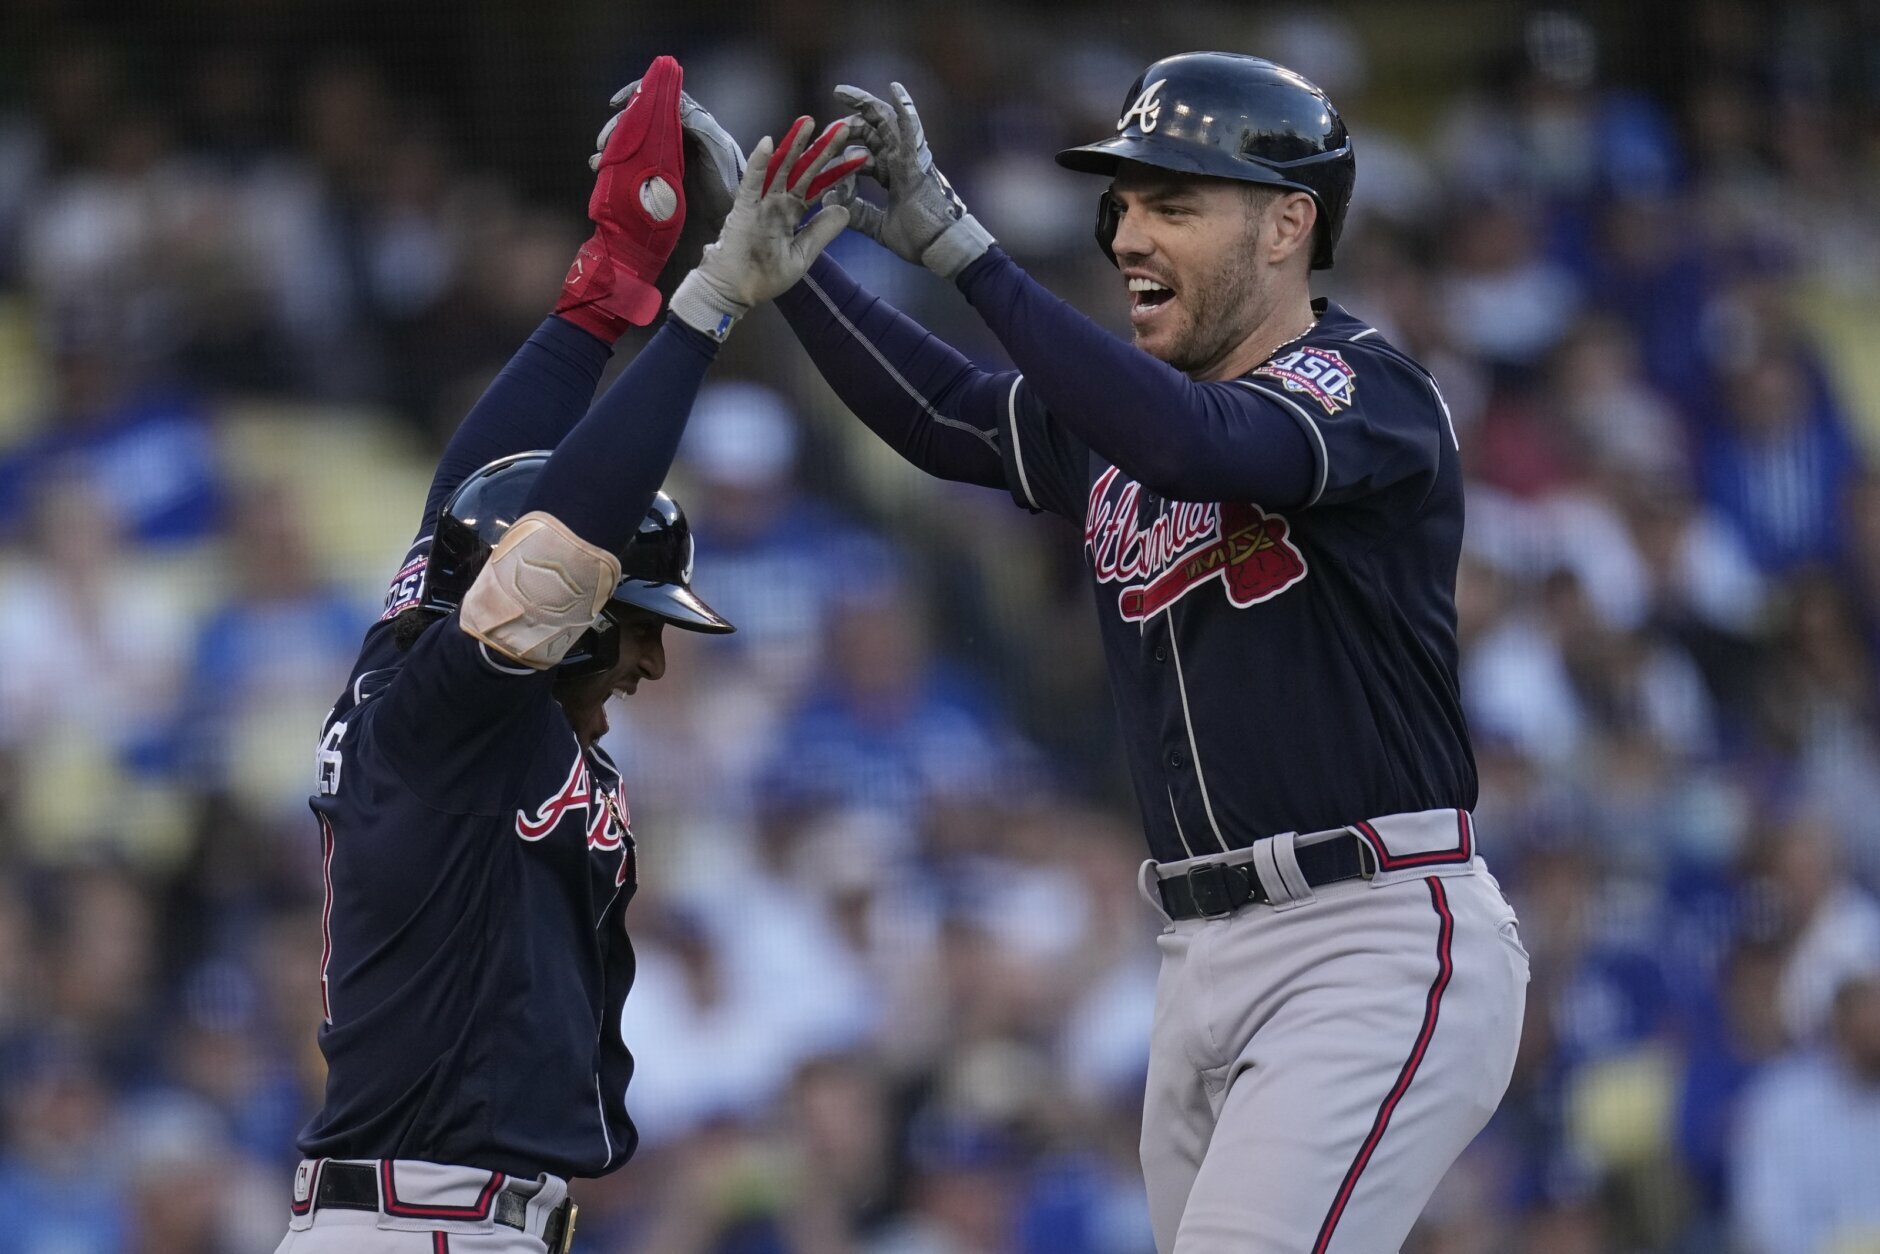 The Braves were never 2021 World Series material, but they won